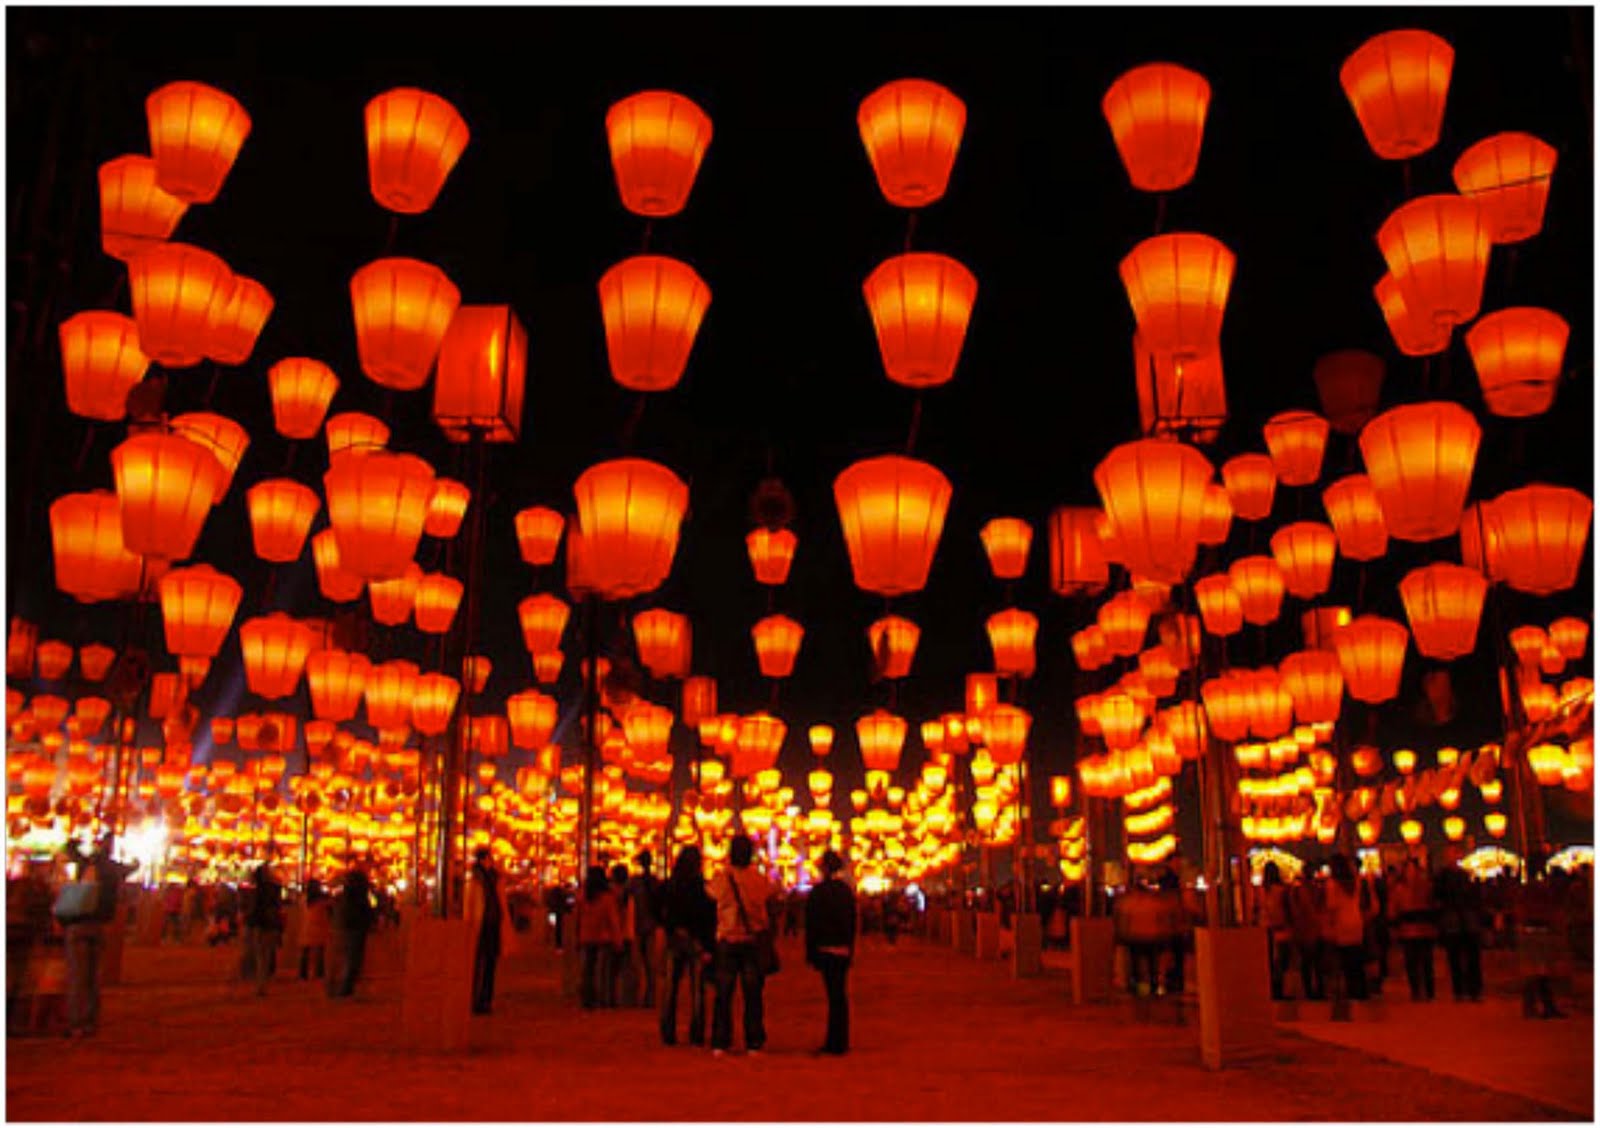 China bulletin: The Spring Festival - Celebrating the victory over the evil